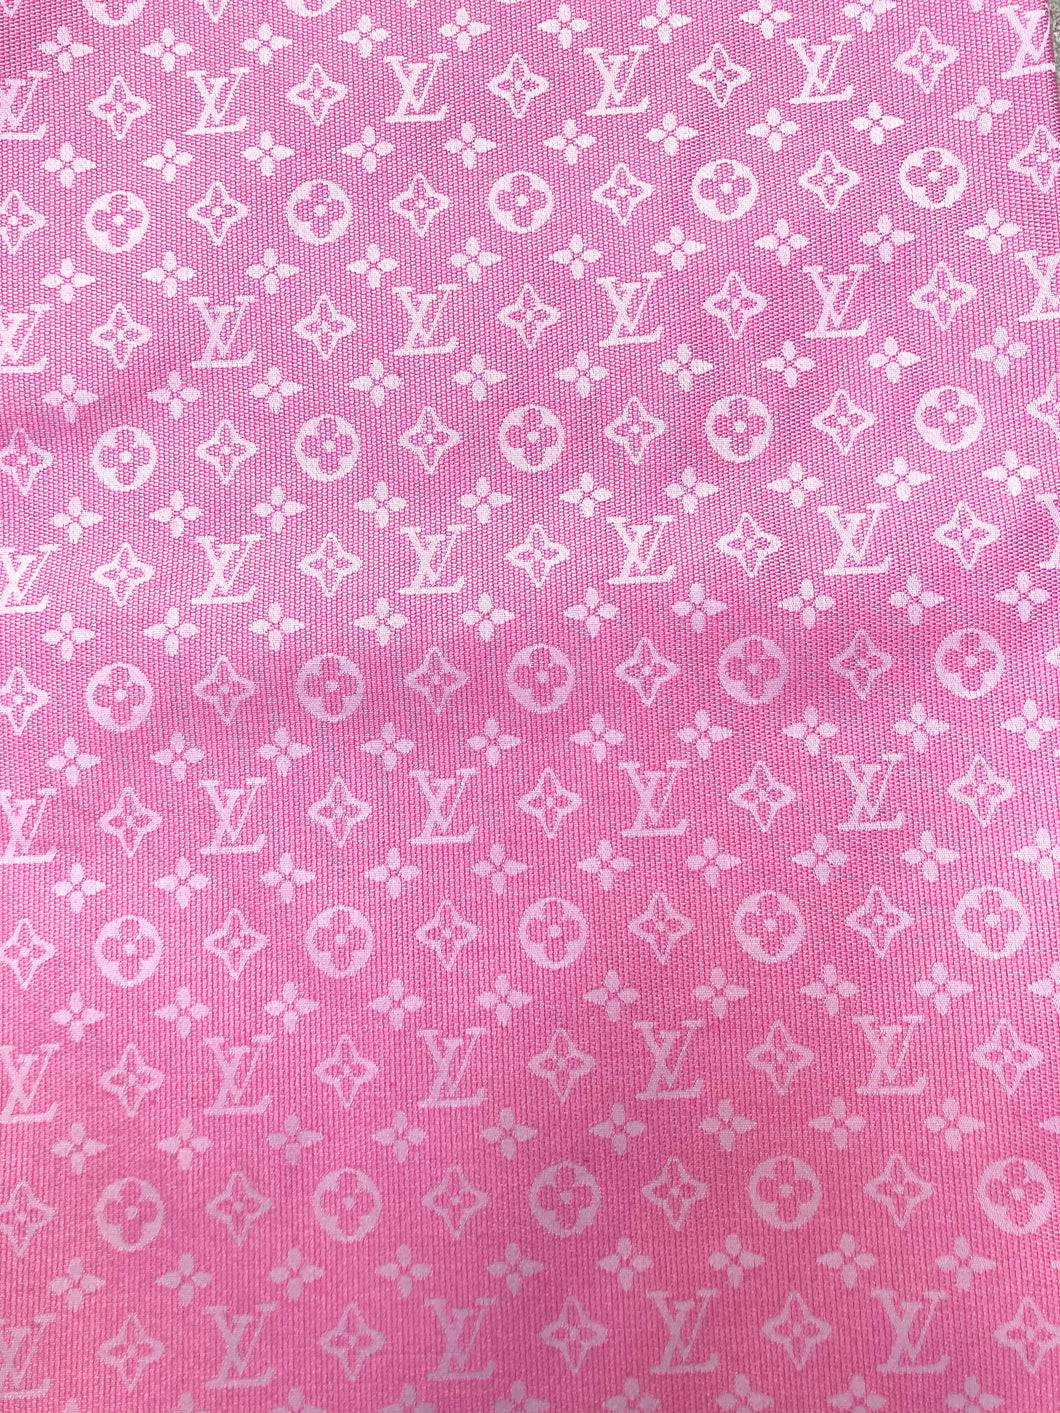 Barbie Pink LV Inspired Custom Fabric for Handmade DIY Projects